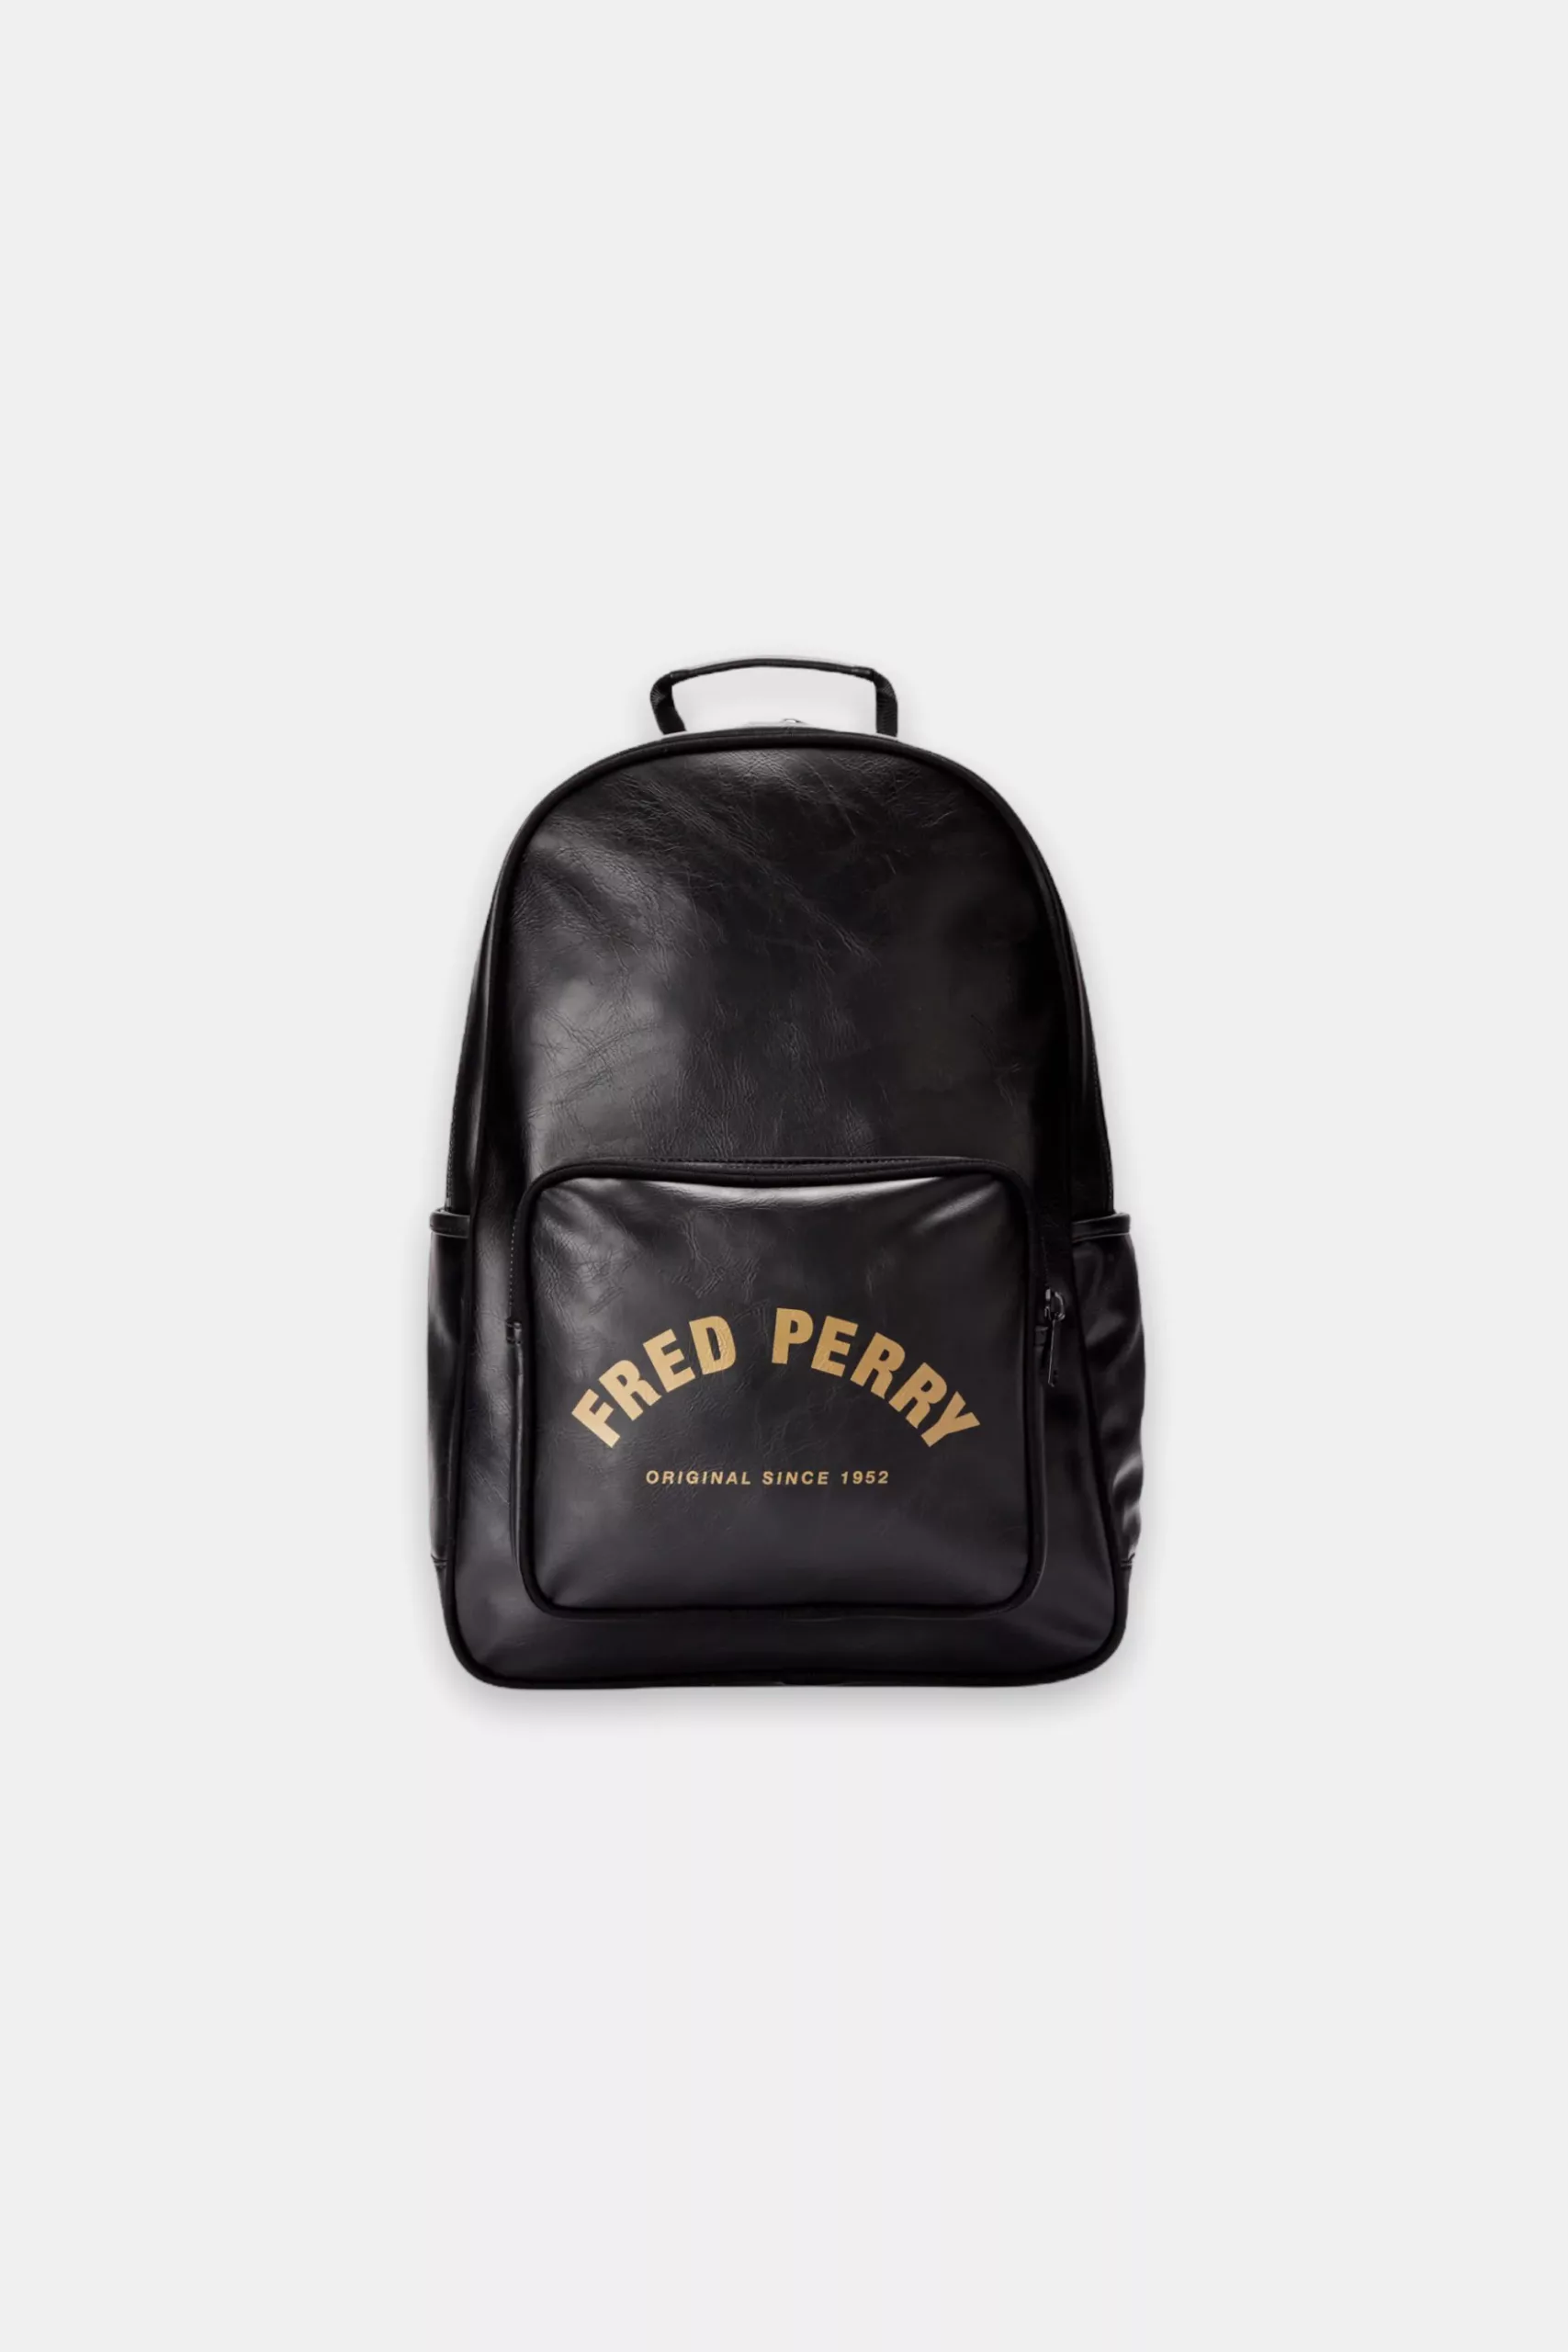 rjukzak fred perry arch black 1